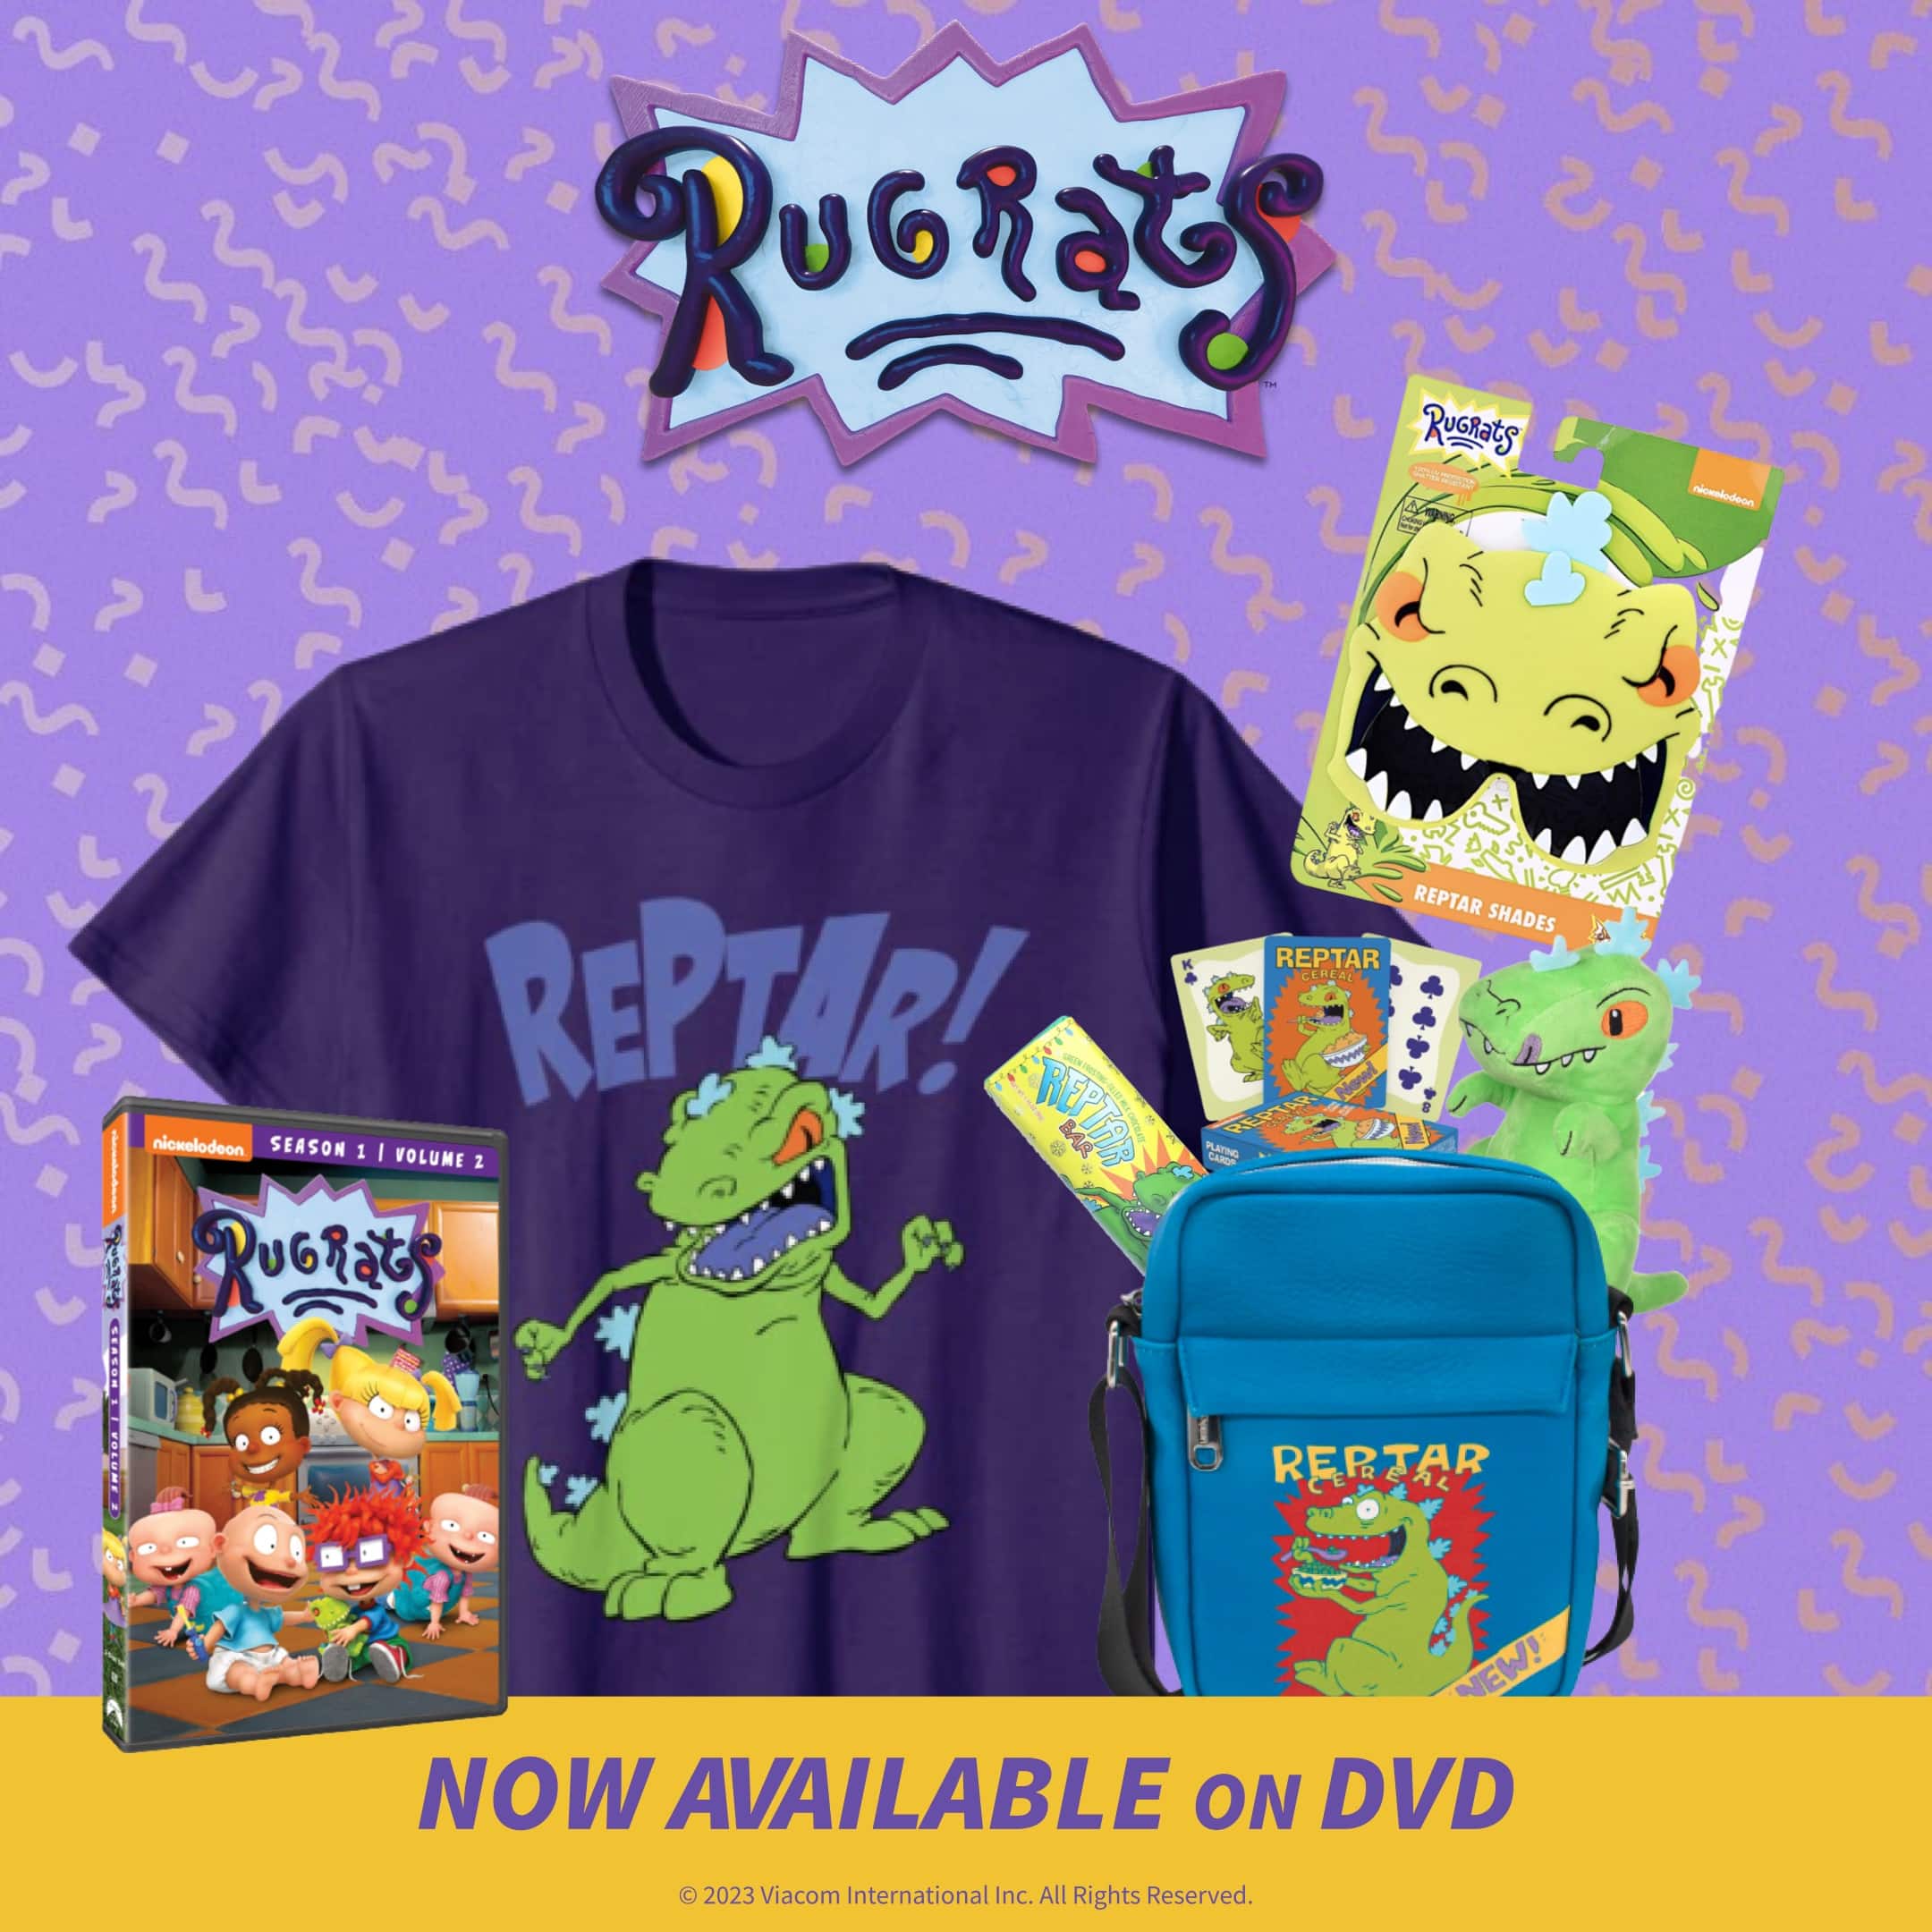 rugrats giveaway prize pack